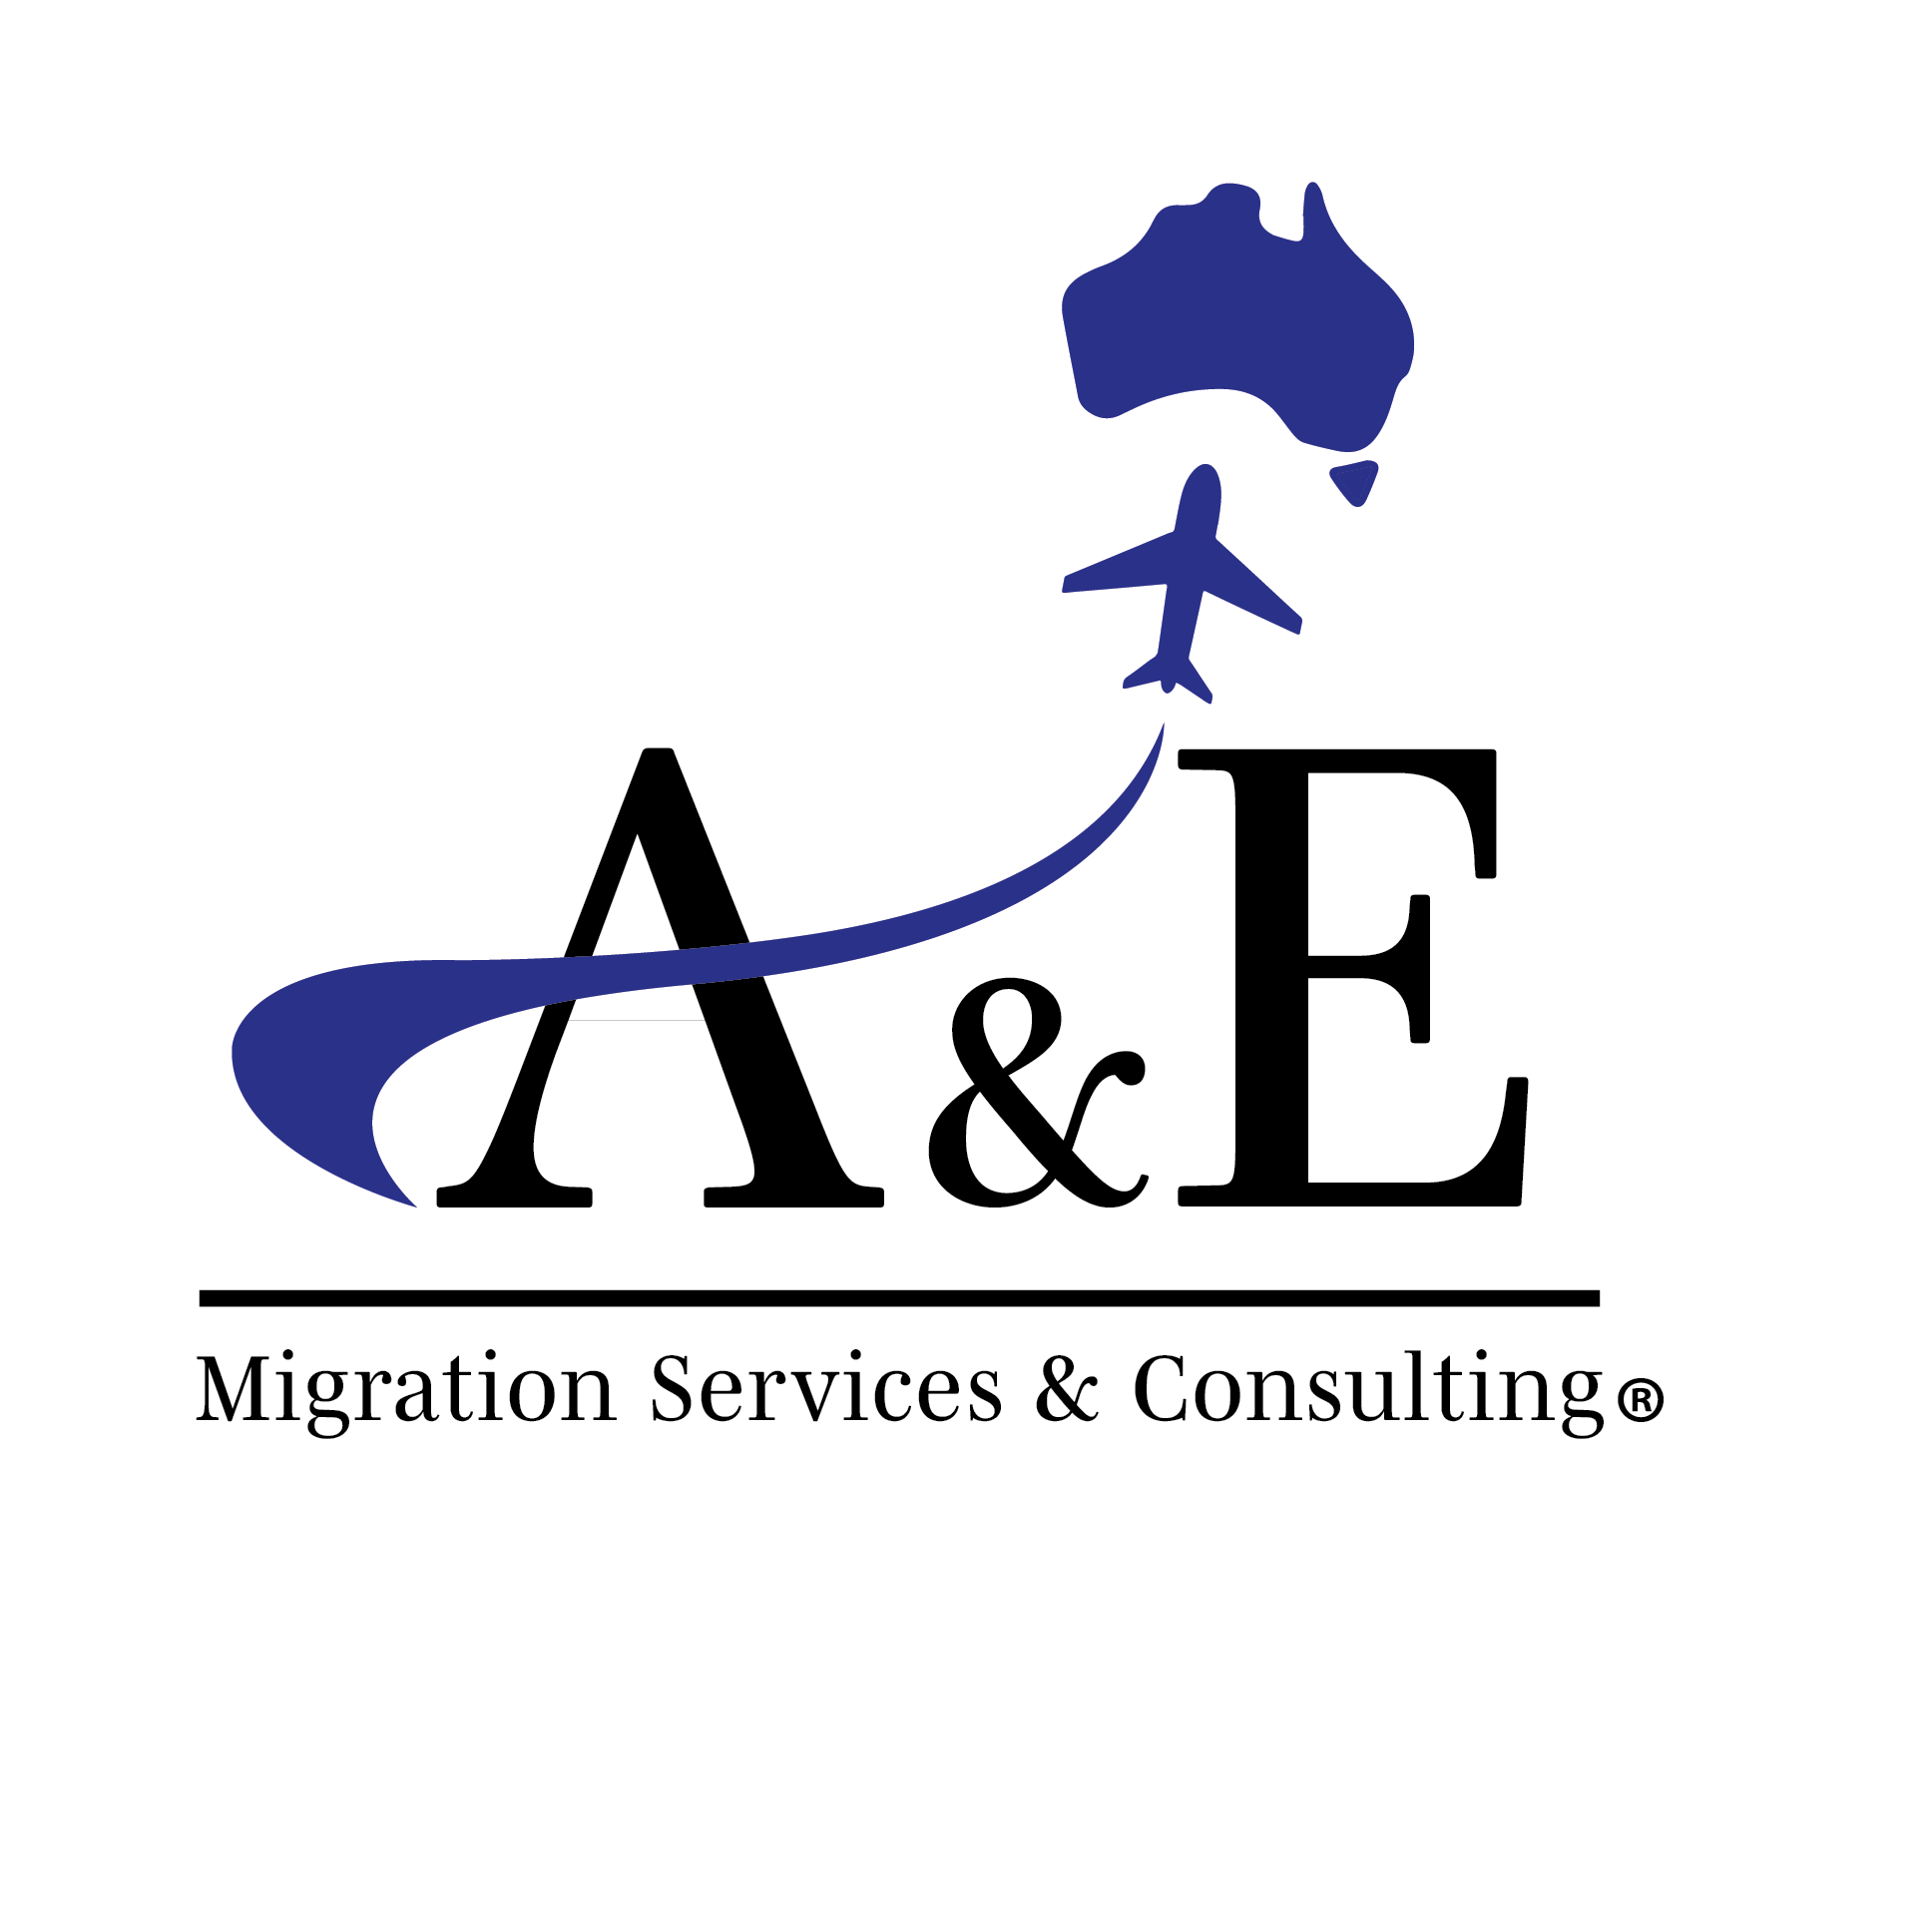 A&E Migration Services and Consulting Pty Ltd